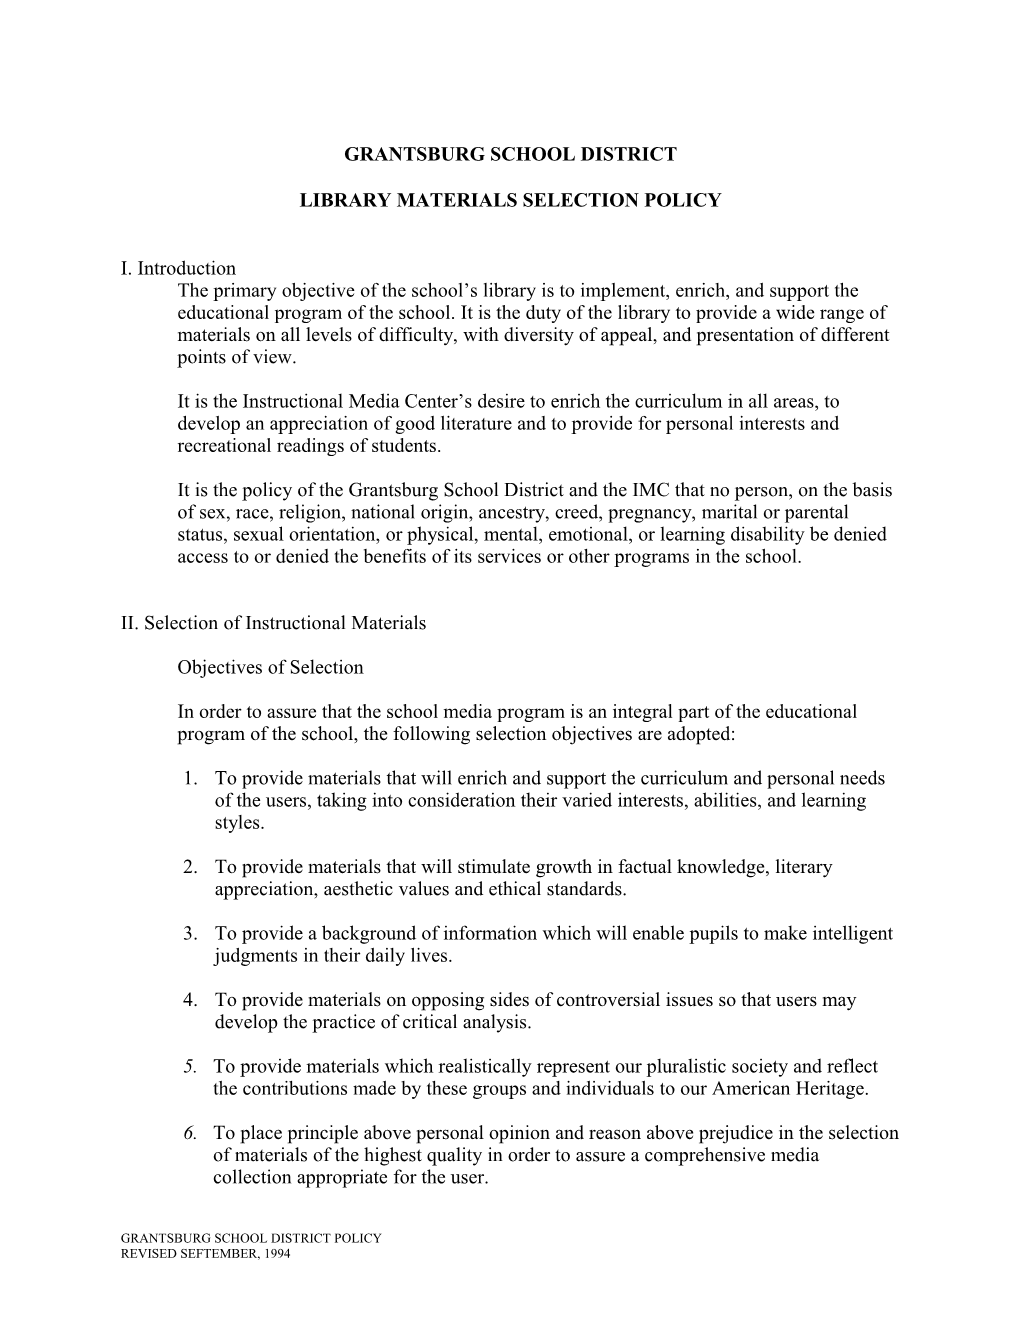 Library Materials Selection Policy